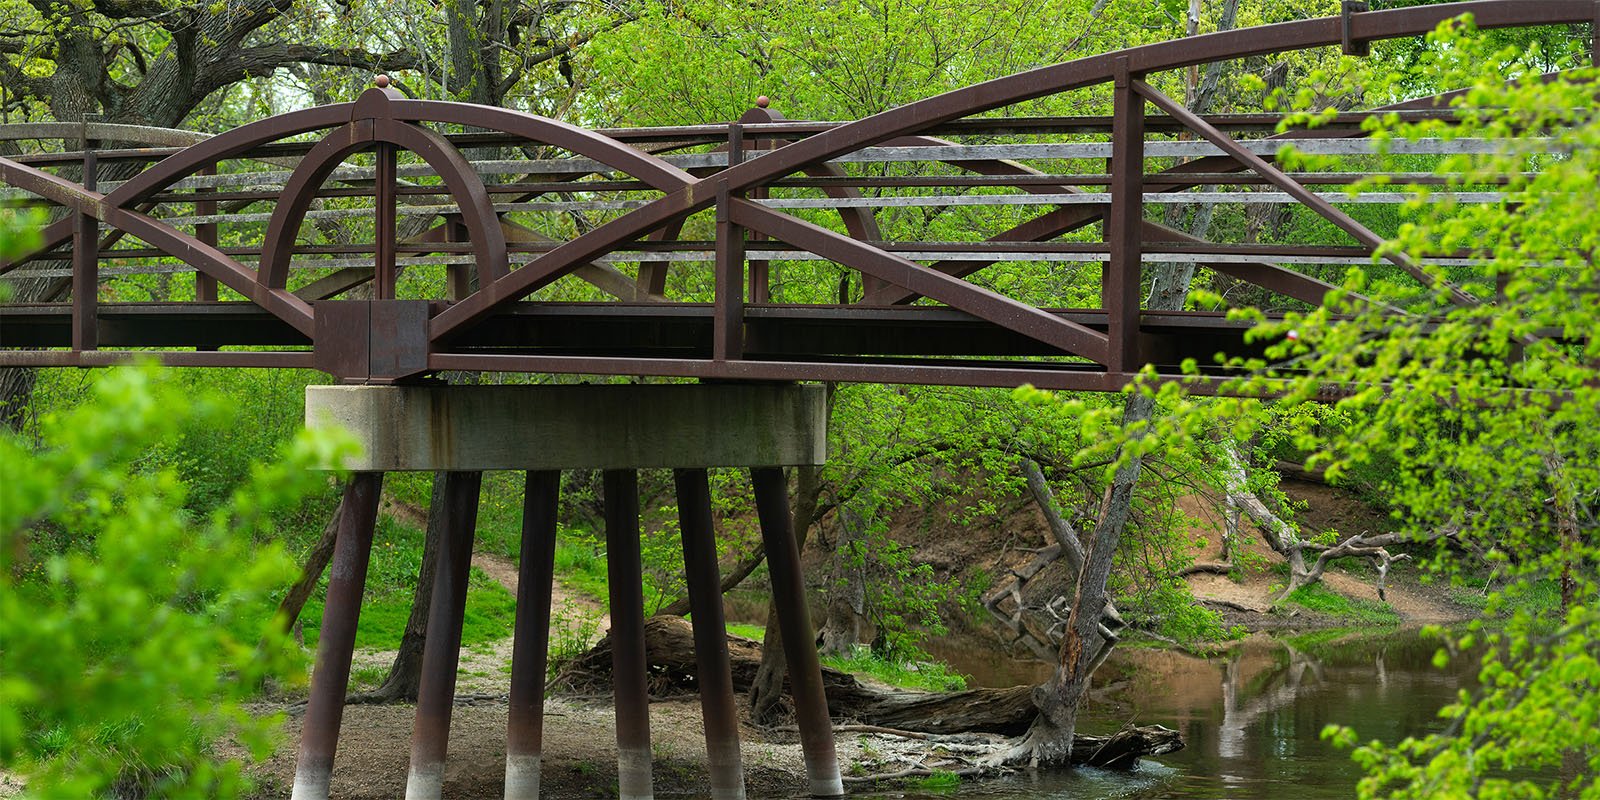 A picturesque wooden bridge with a circular arch design over a small creek, surrounded by flourishing green trees and bushes in a lush, serene forest setting.